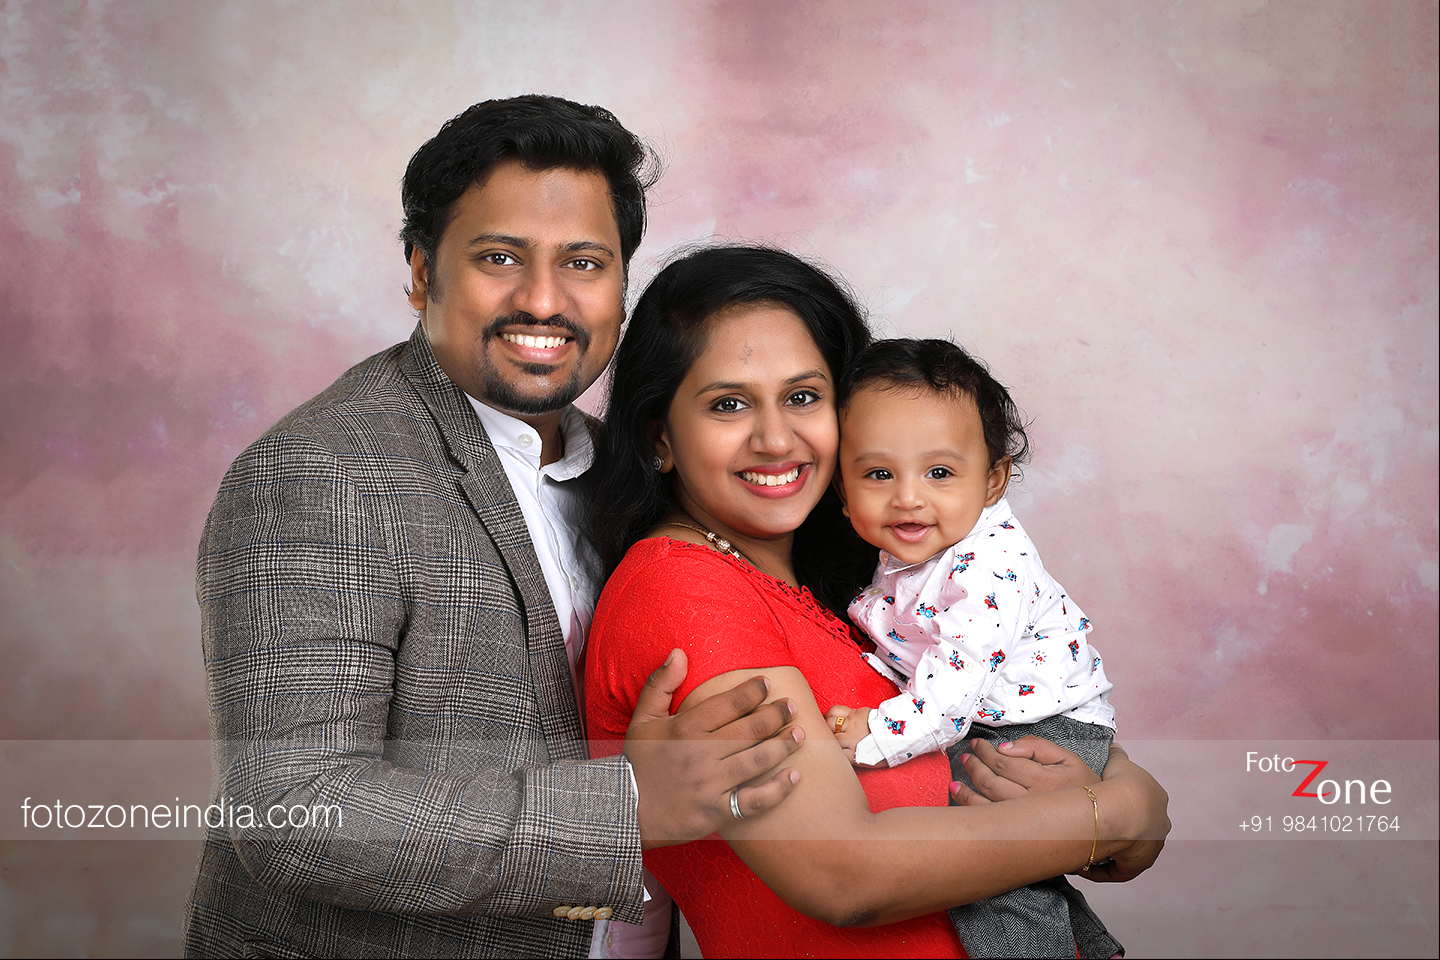 Top 10 Tips for Family Photo Poses